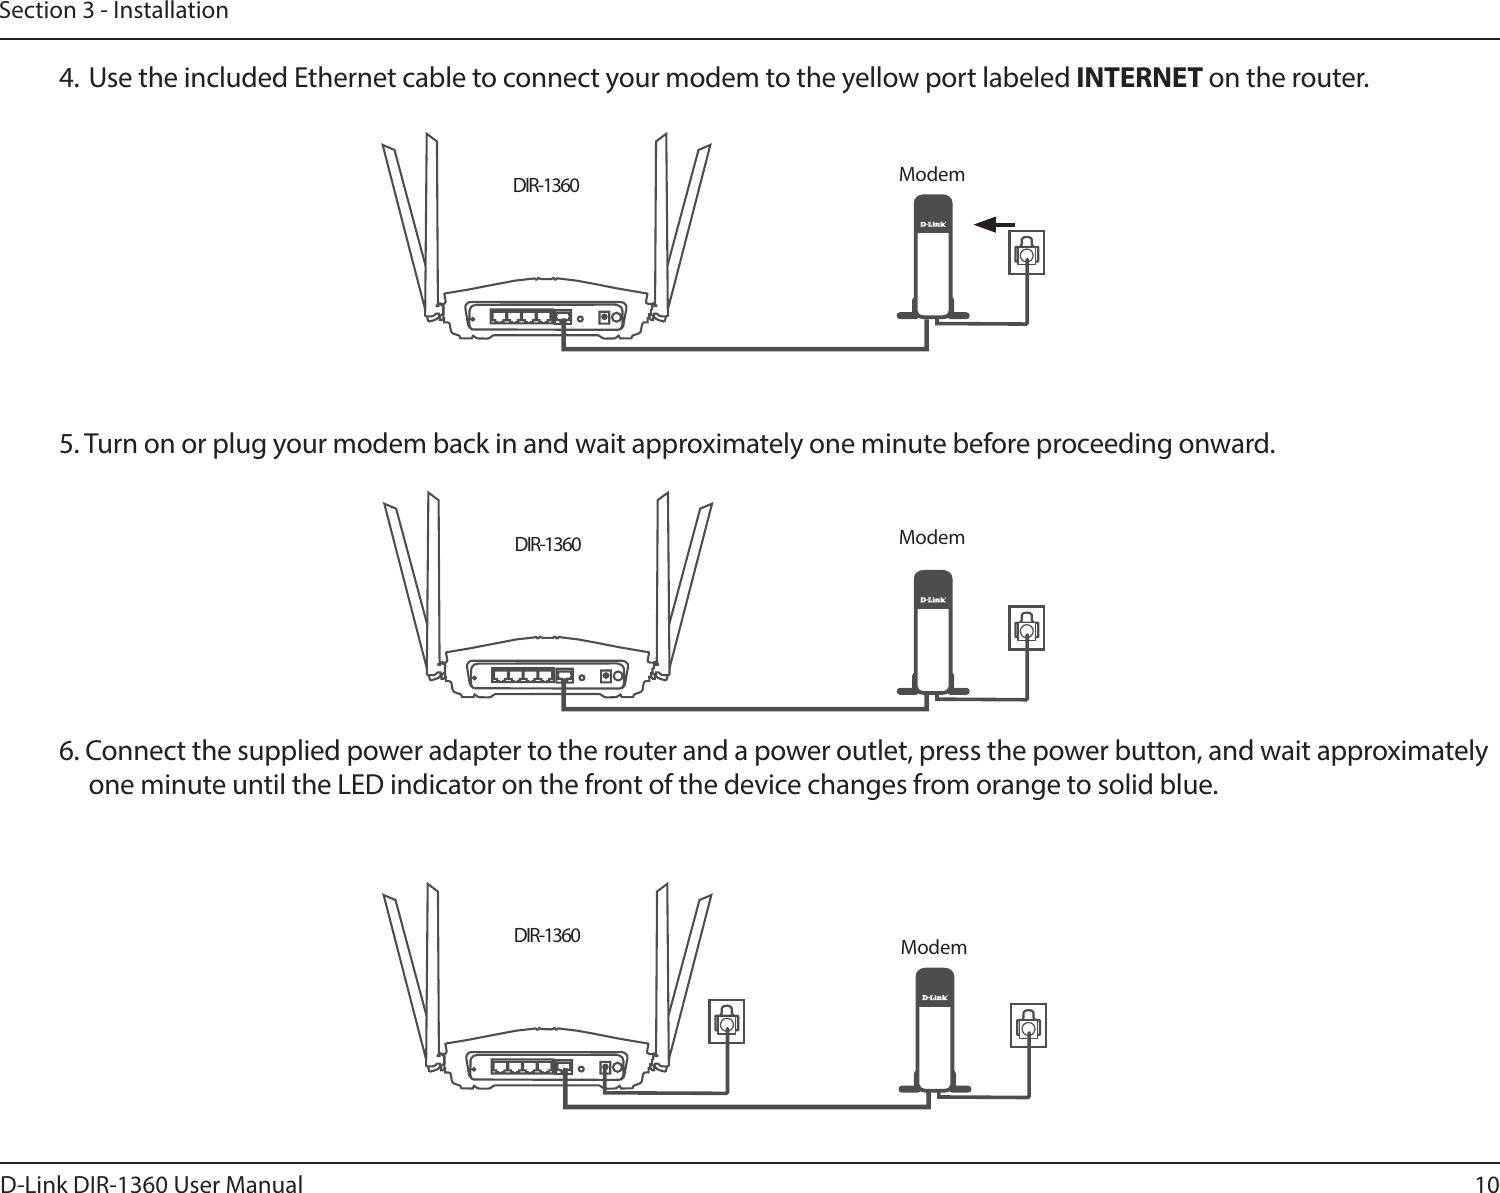 10D-Link DIR-1360 User ManualSection 3 - InstallationDIR-1360DIR-1360DIR-13605. Turn on or plug your modem back in and wait approximately one minute before proceeding onward.6. Connect the supplied power adapter to the router and a power outlet, press the power button, and wait approximately one minute until the LED indicator on the front of the device changes from orange to solid blue.Modem4. Use the included Ethernet cable to connect your modem to the yellow port labeled INTERNET on the router.ModemModem